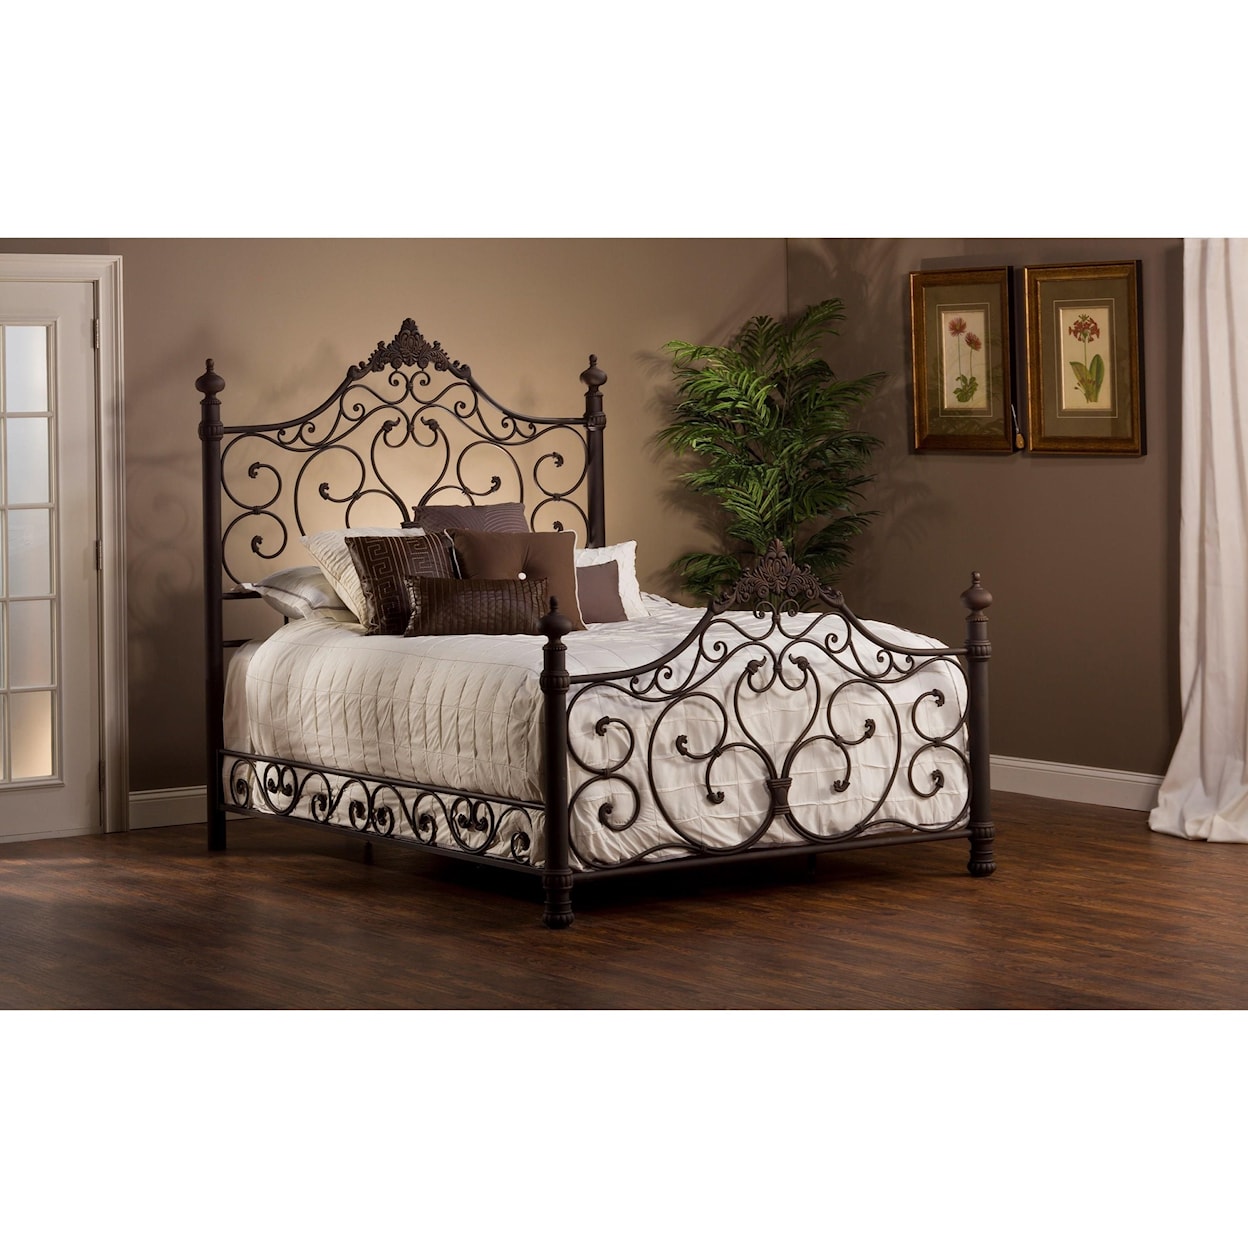 Hillsdale Metal Beds Queen Bed Set with Rails